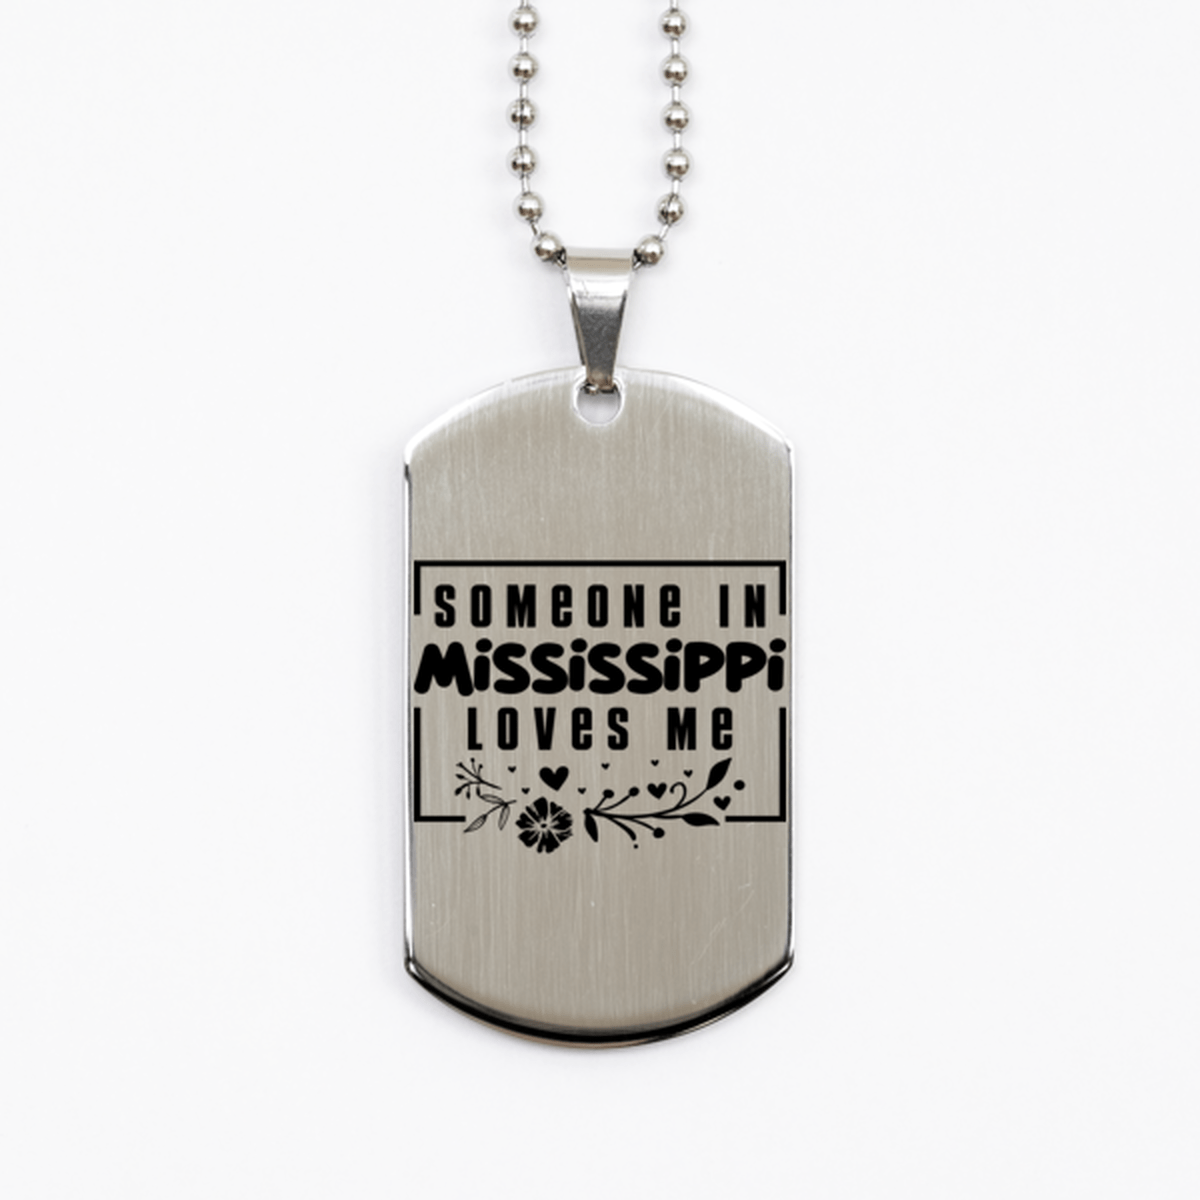 Cute Mississippi Silver Dog Tag Necklace, Someone in Mississippi Loves Me, Best Birthday Gifts from Mississippi Friends & Family